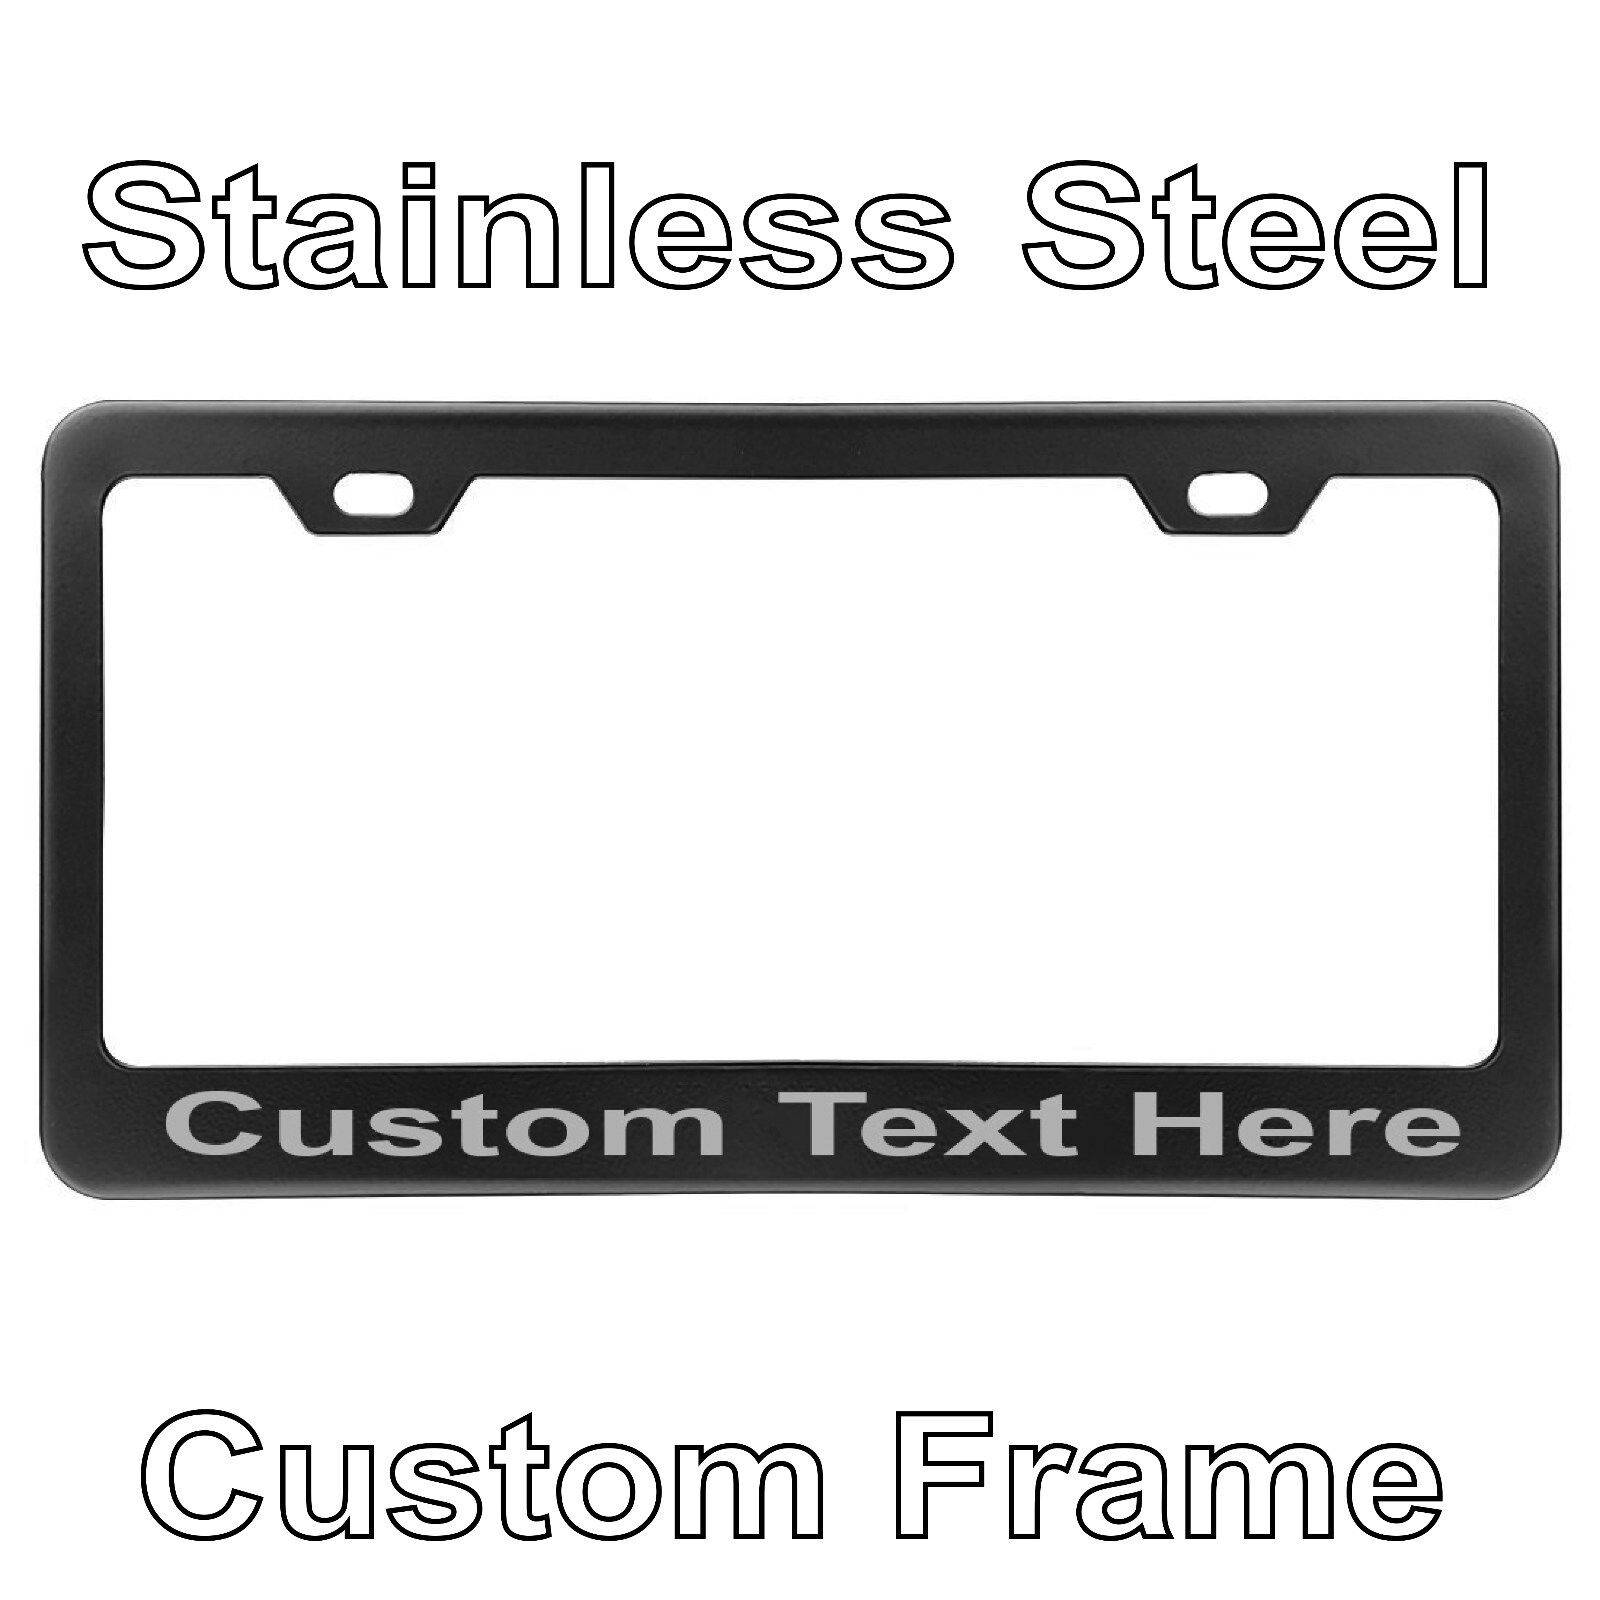 Custom Laser Engrave Black Stainless Steel Metal License Plate Frame With TEXT